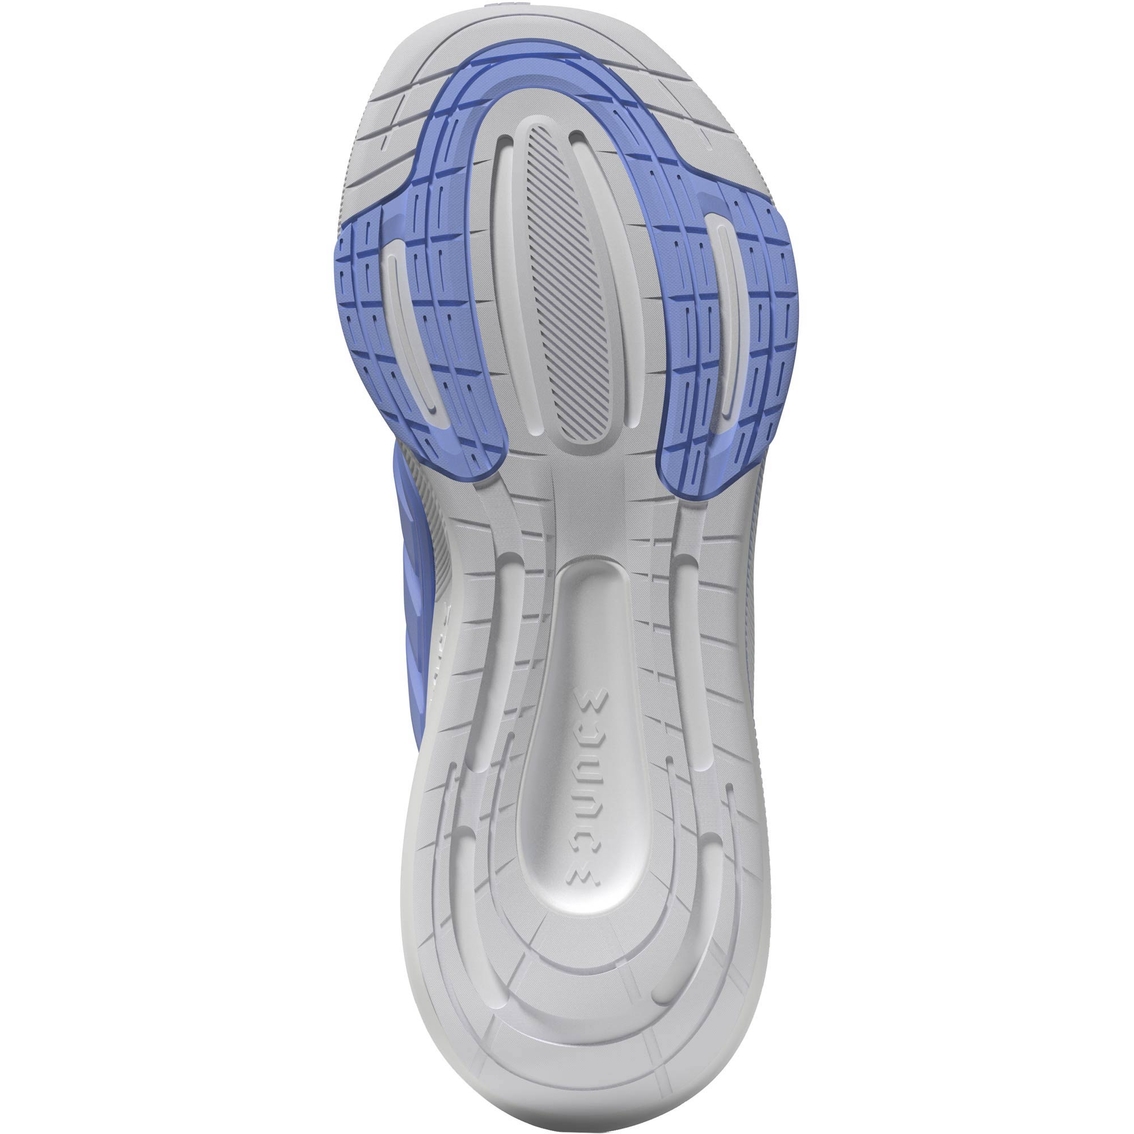 Adidas Womne's Ultrabounce Running Shoes - Image 4 of 8